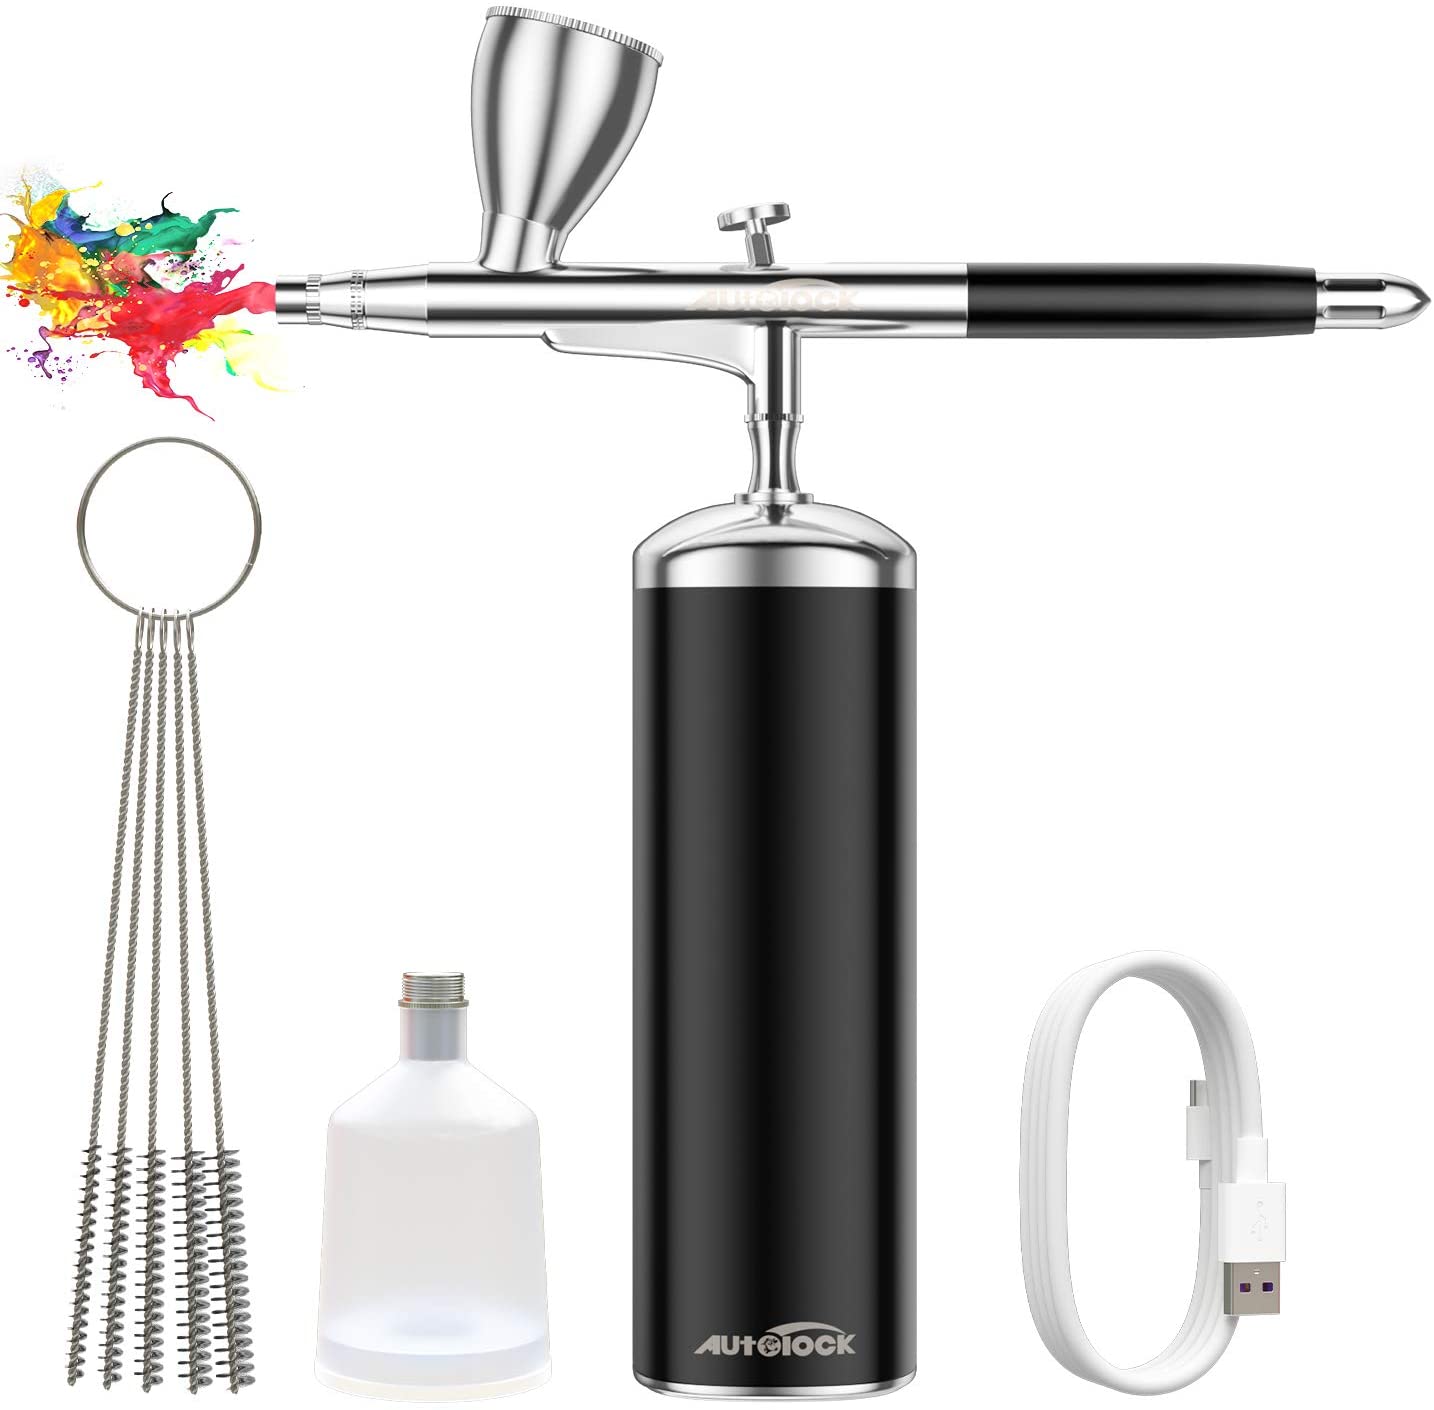 Autolock Upgraded Airbrush Kit With Air Compressor, Portable